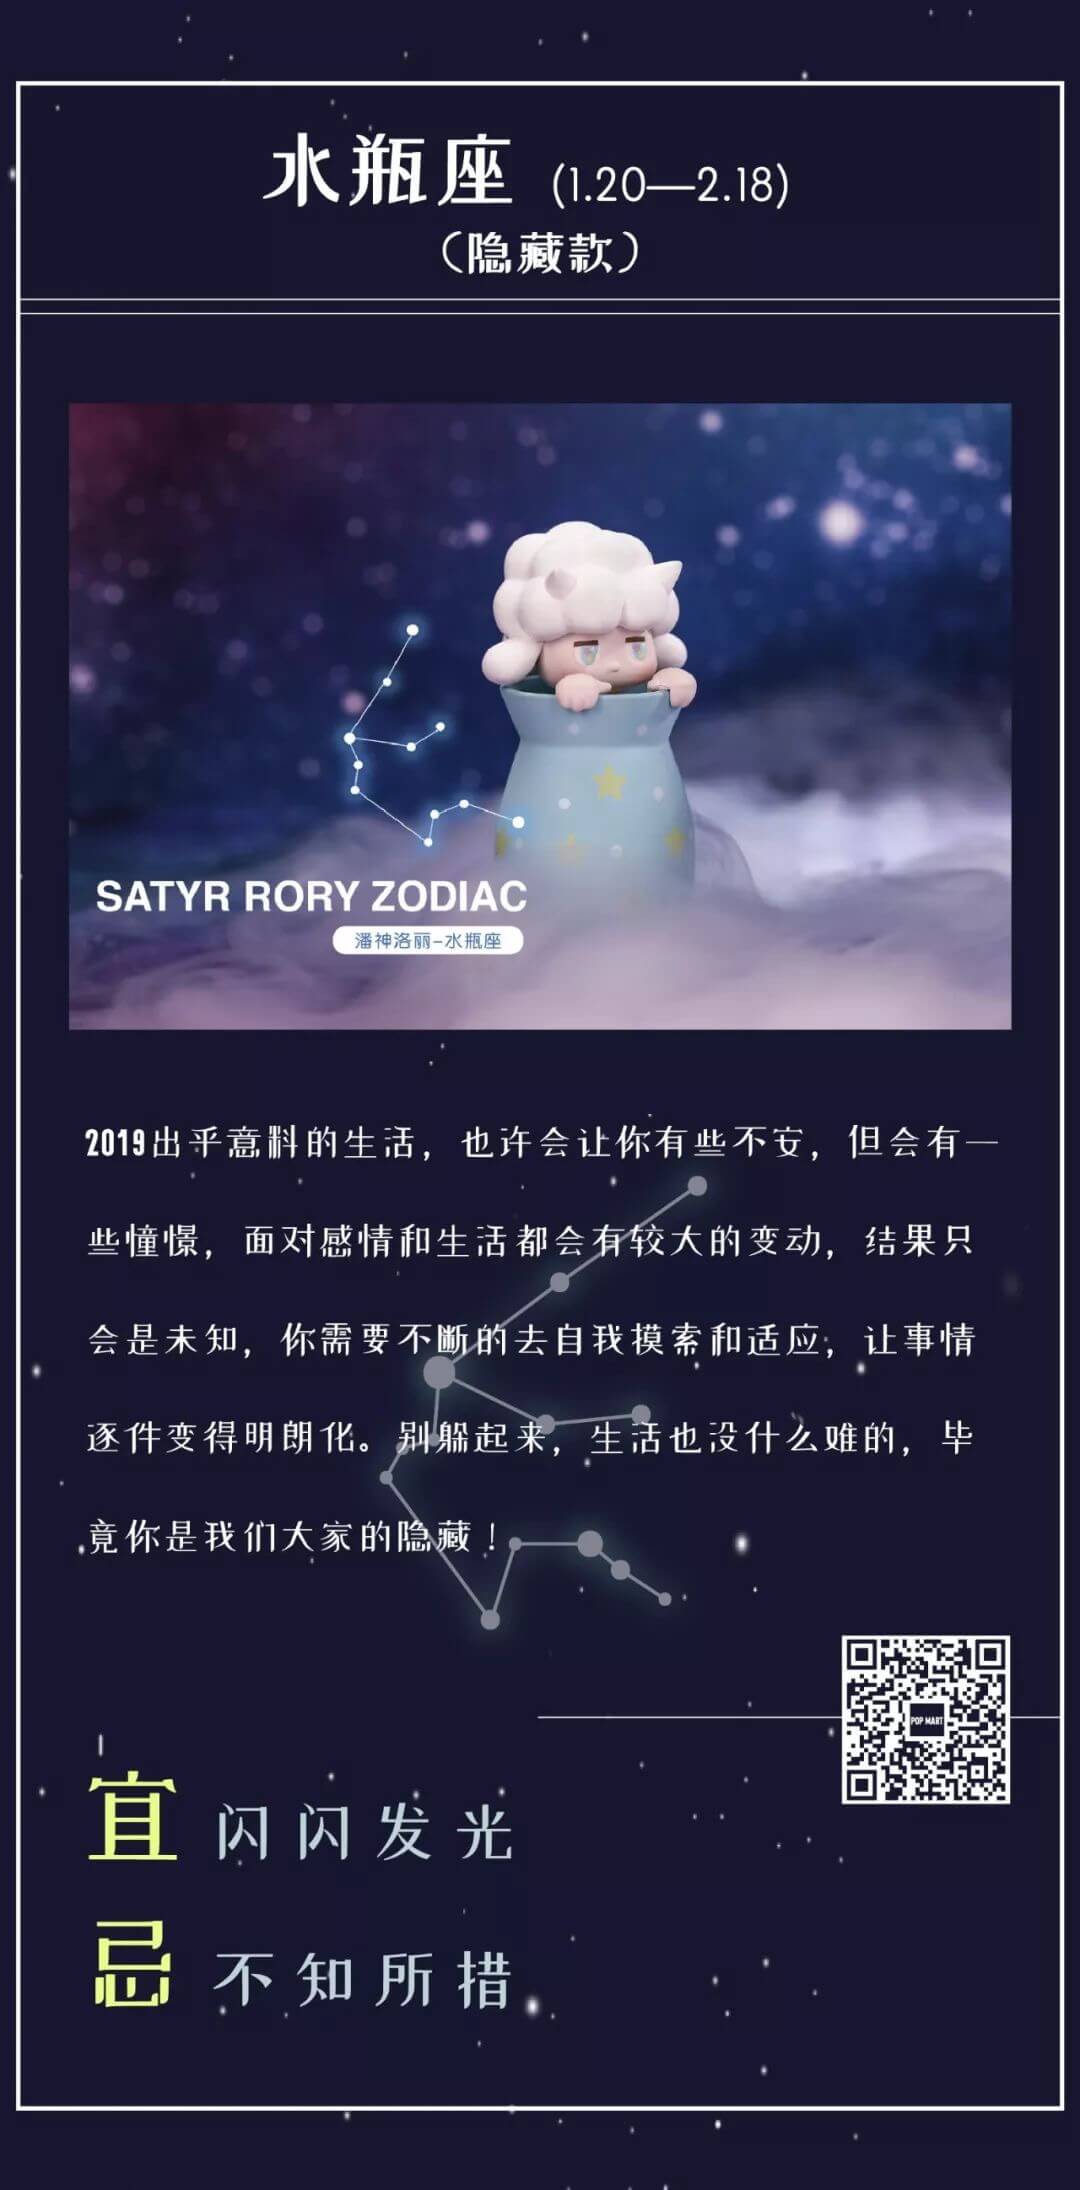 Satyr-Rory-Zodic-Edition-Mini-Series-by-Seulgie-Lee-x-POP-MART-the-toy-chronicle-2019-eeeqe